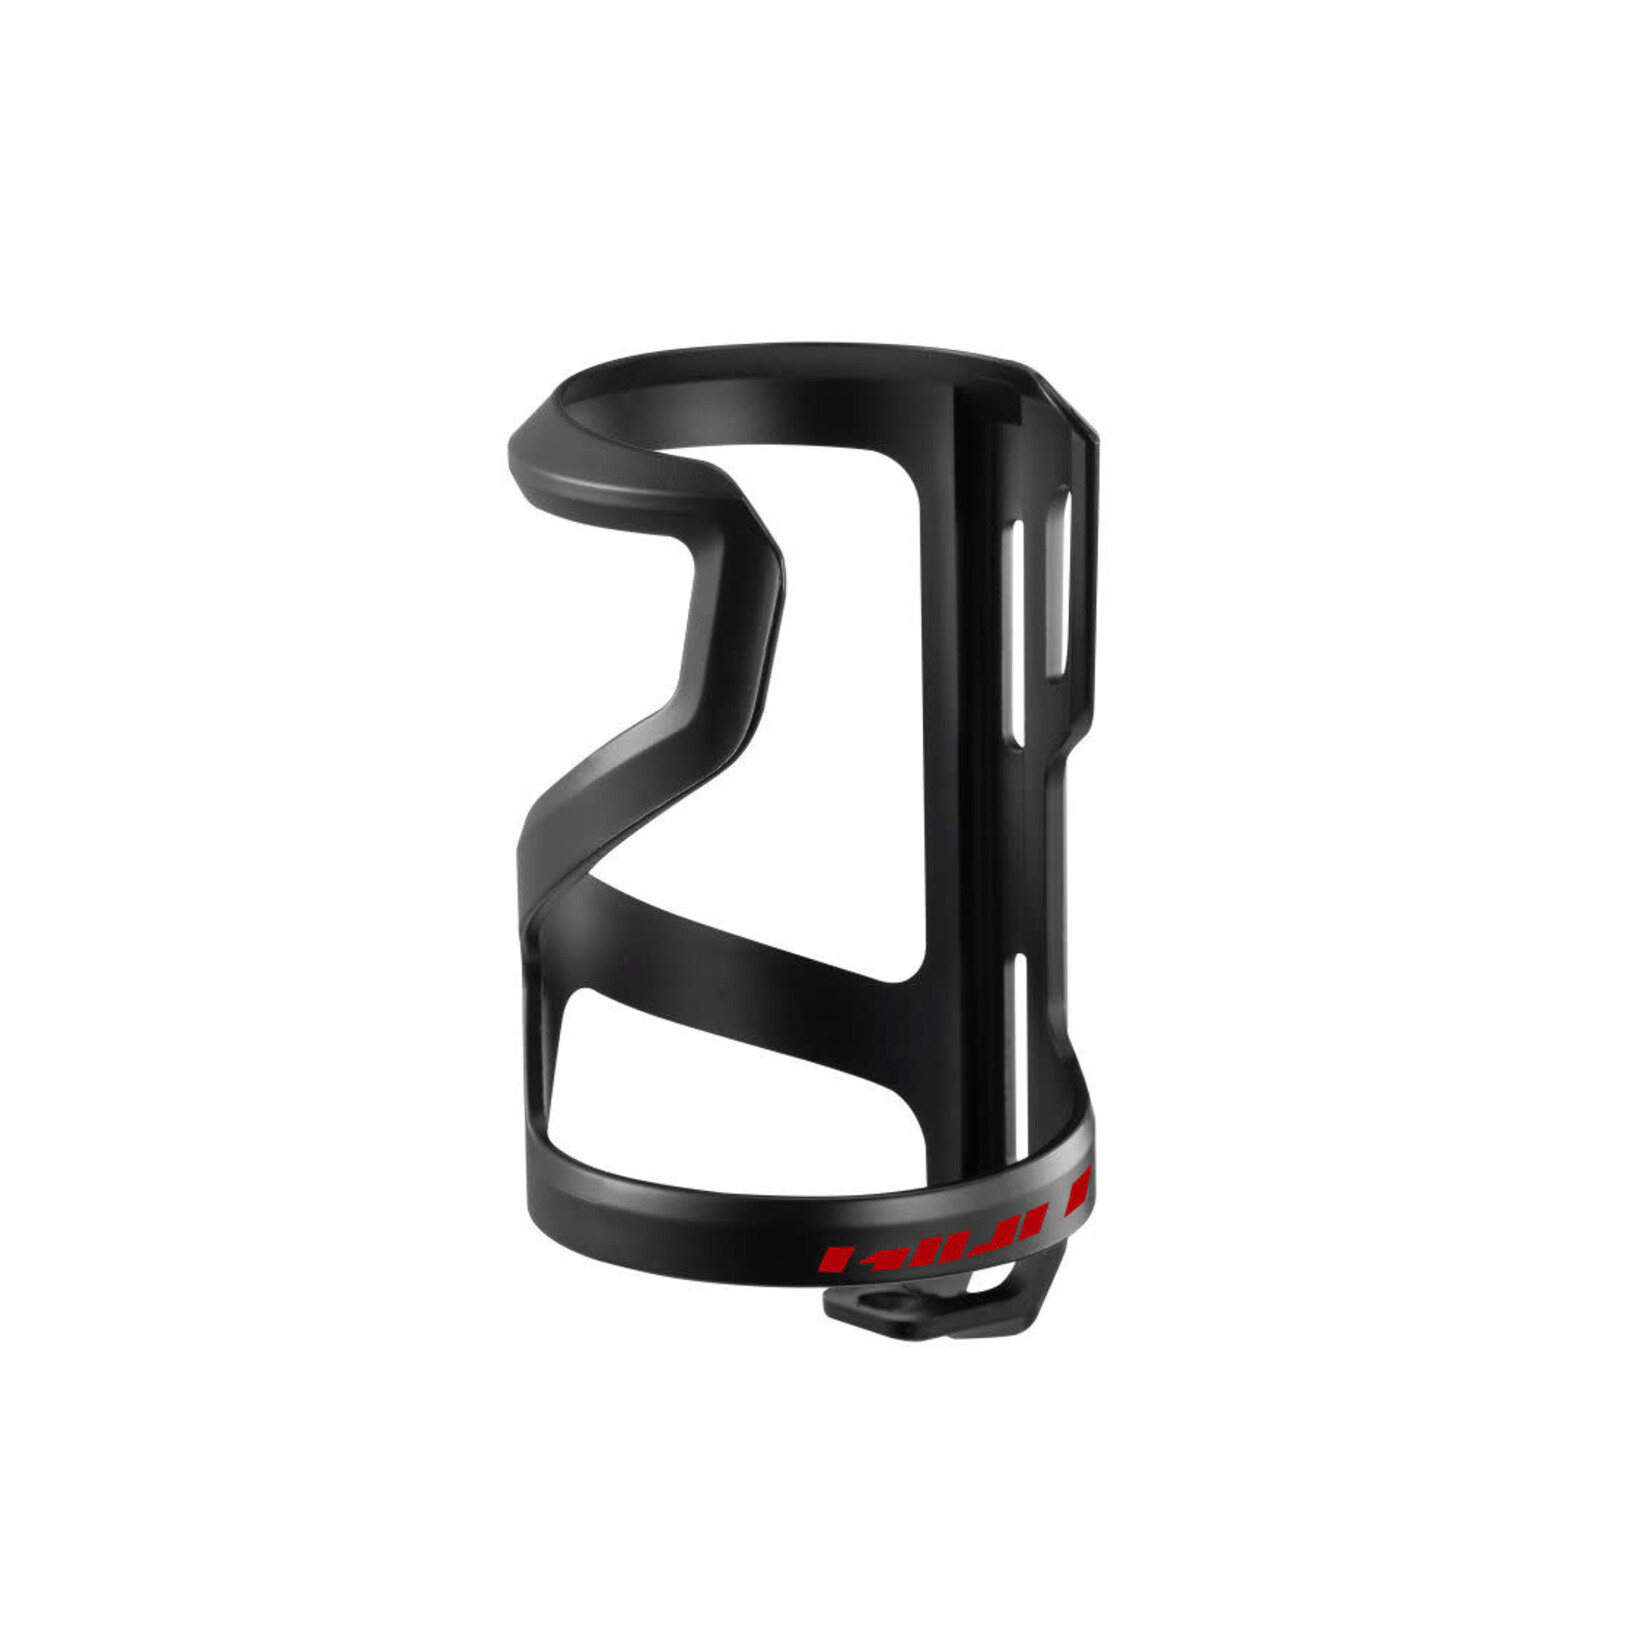 Giant Giant Cage Airway sidepull Matte Black/Red Right